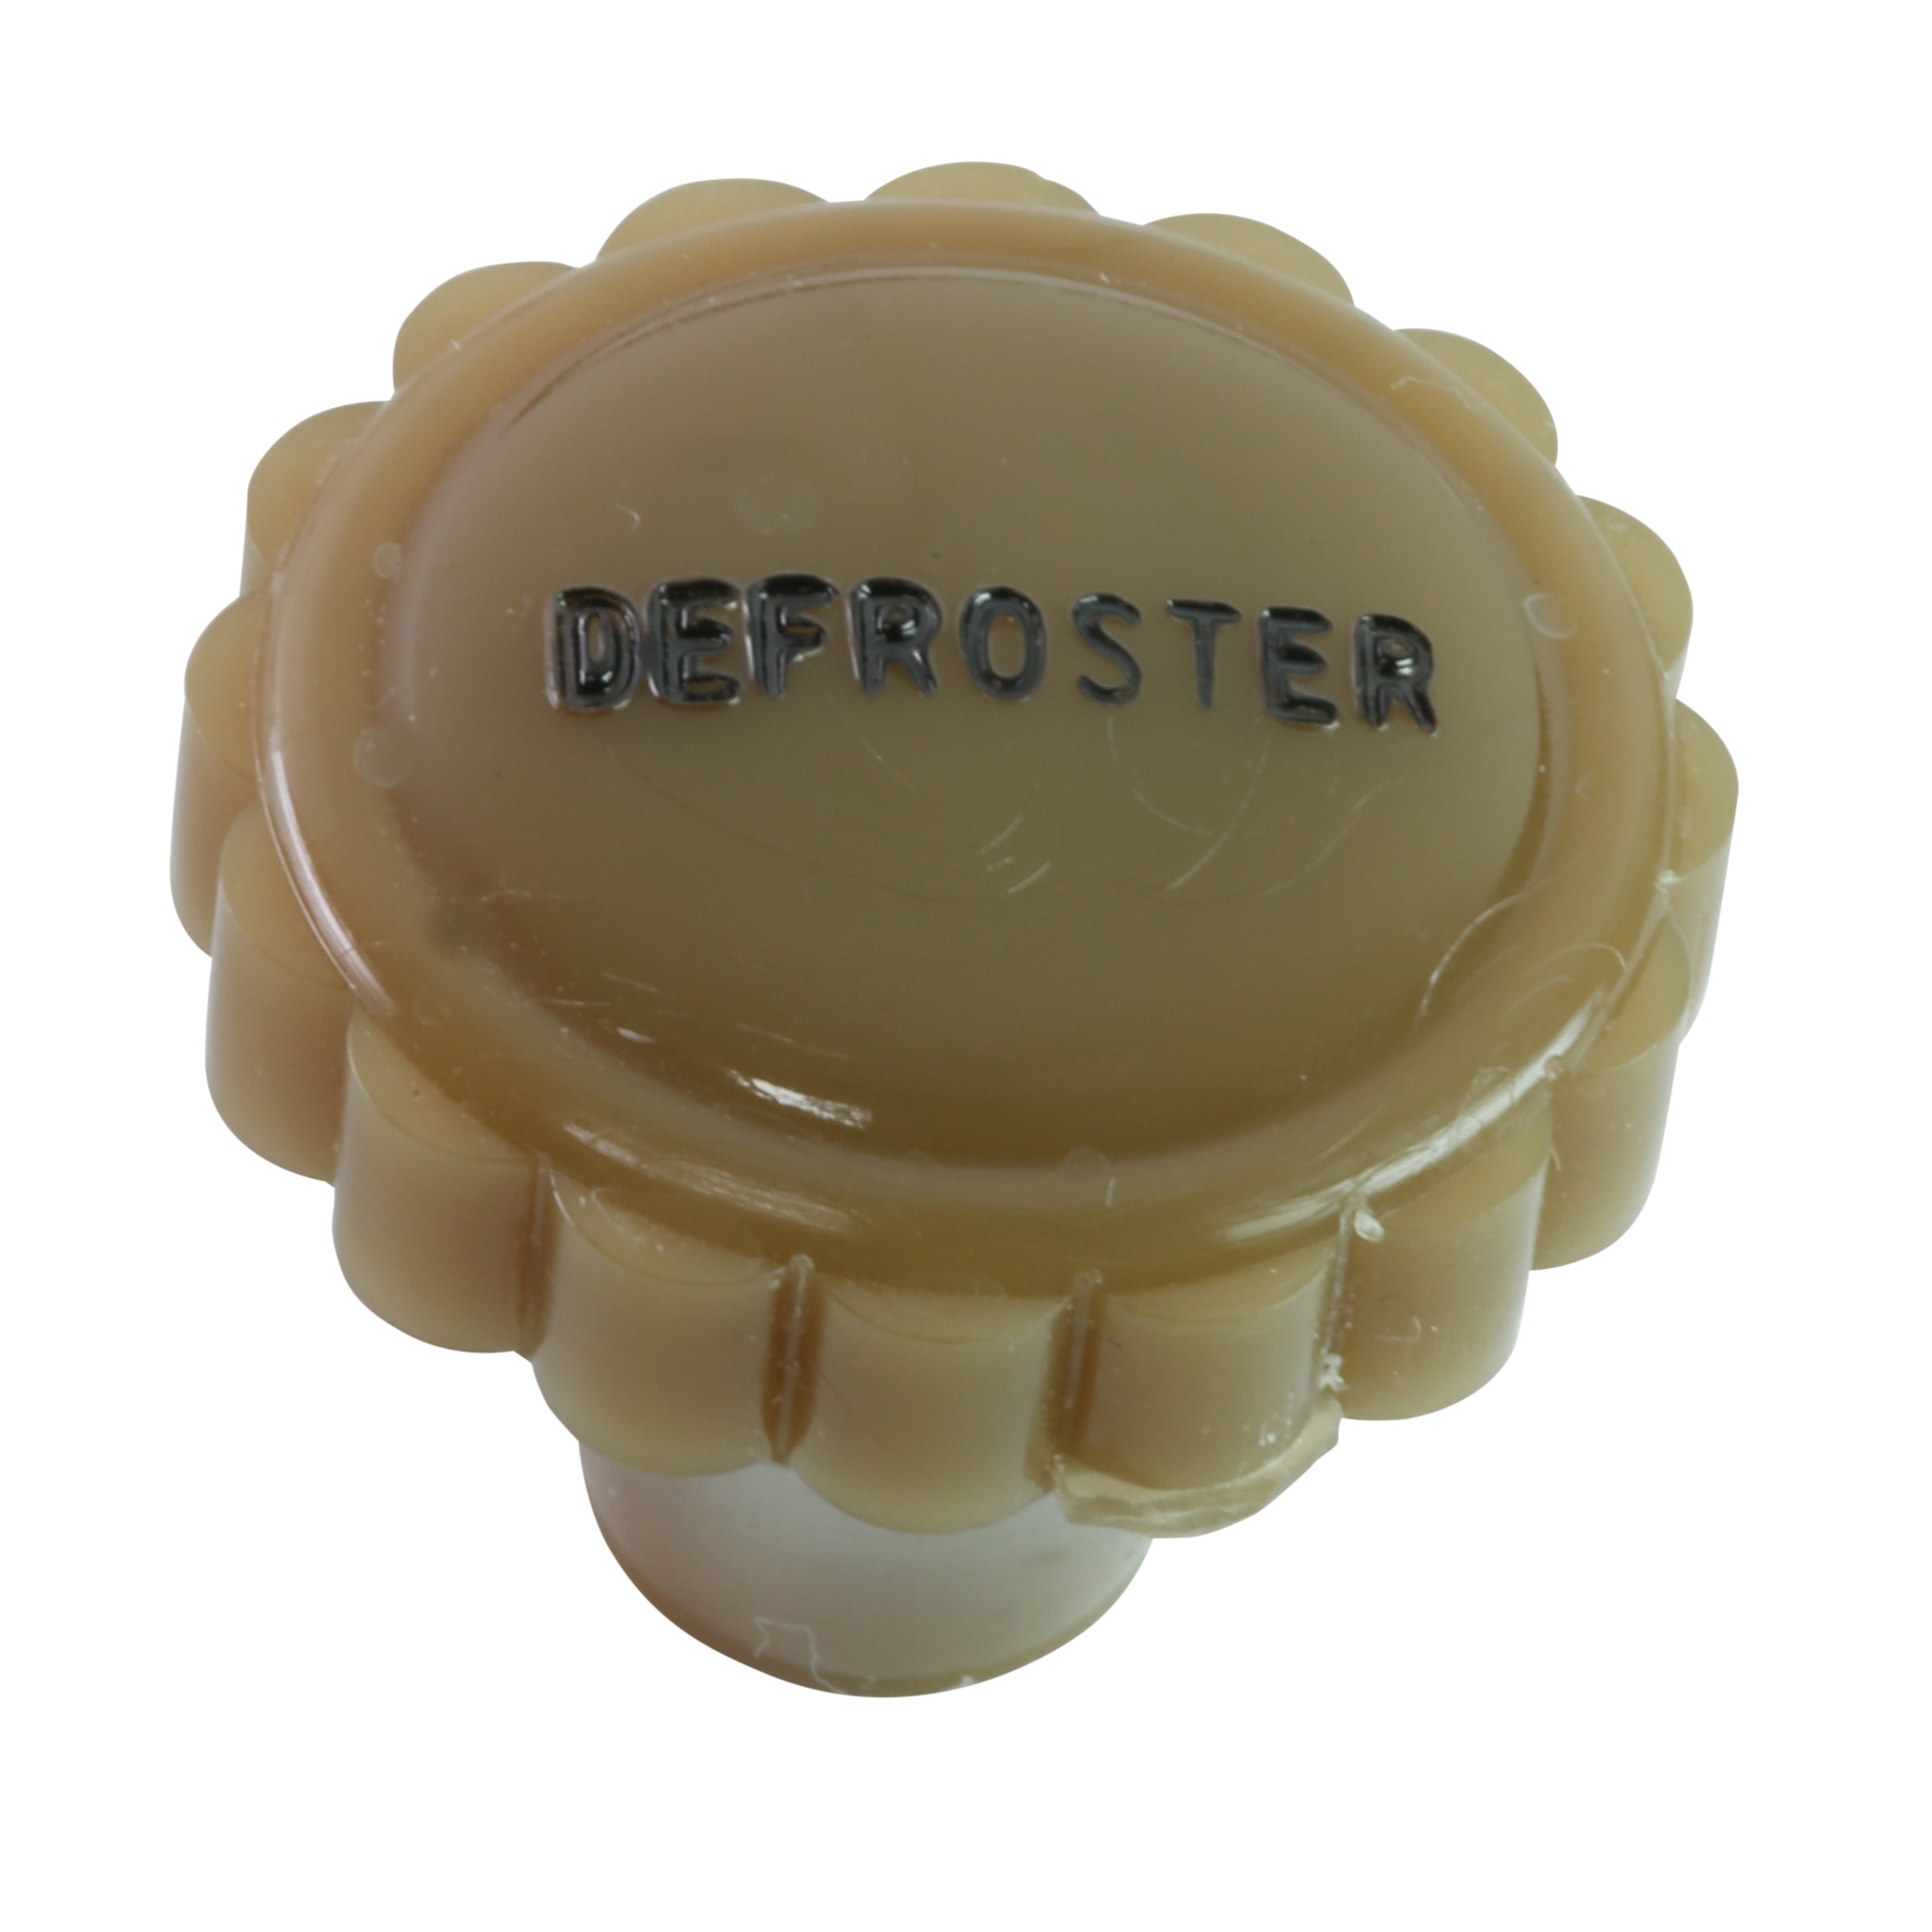 Hot Water Heater Defroster Knob • 1937 Ford Deluxe